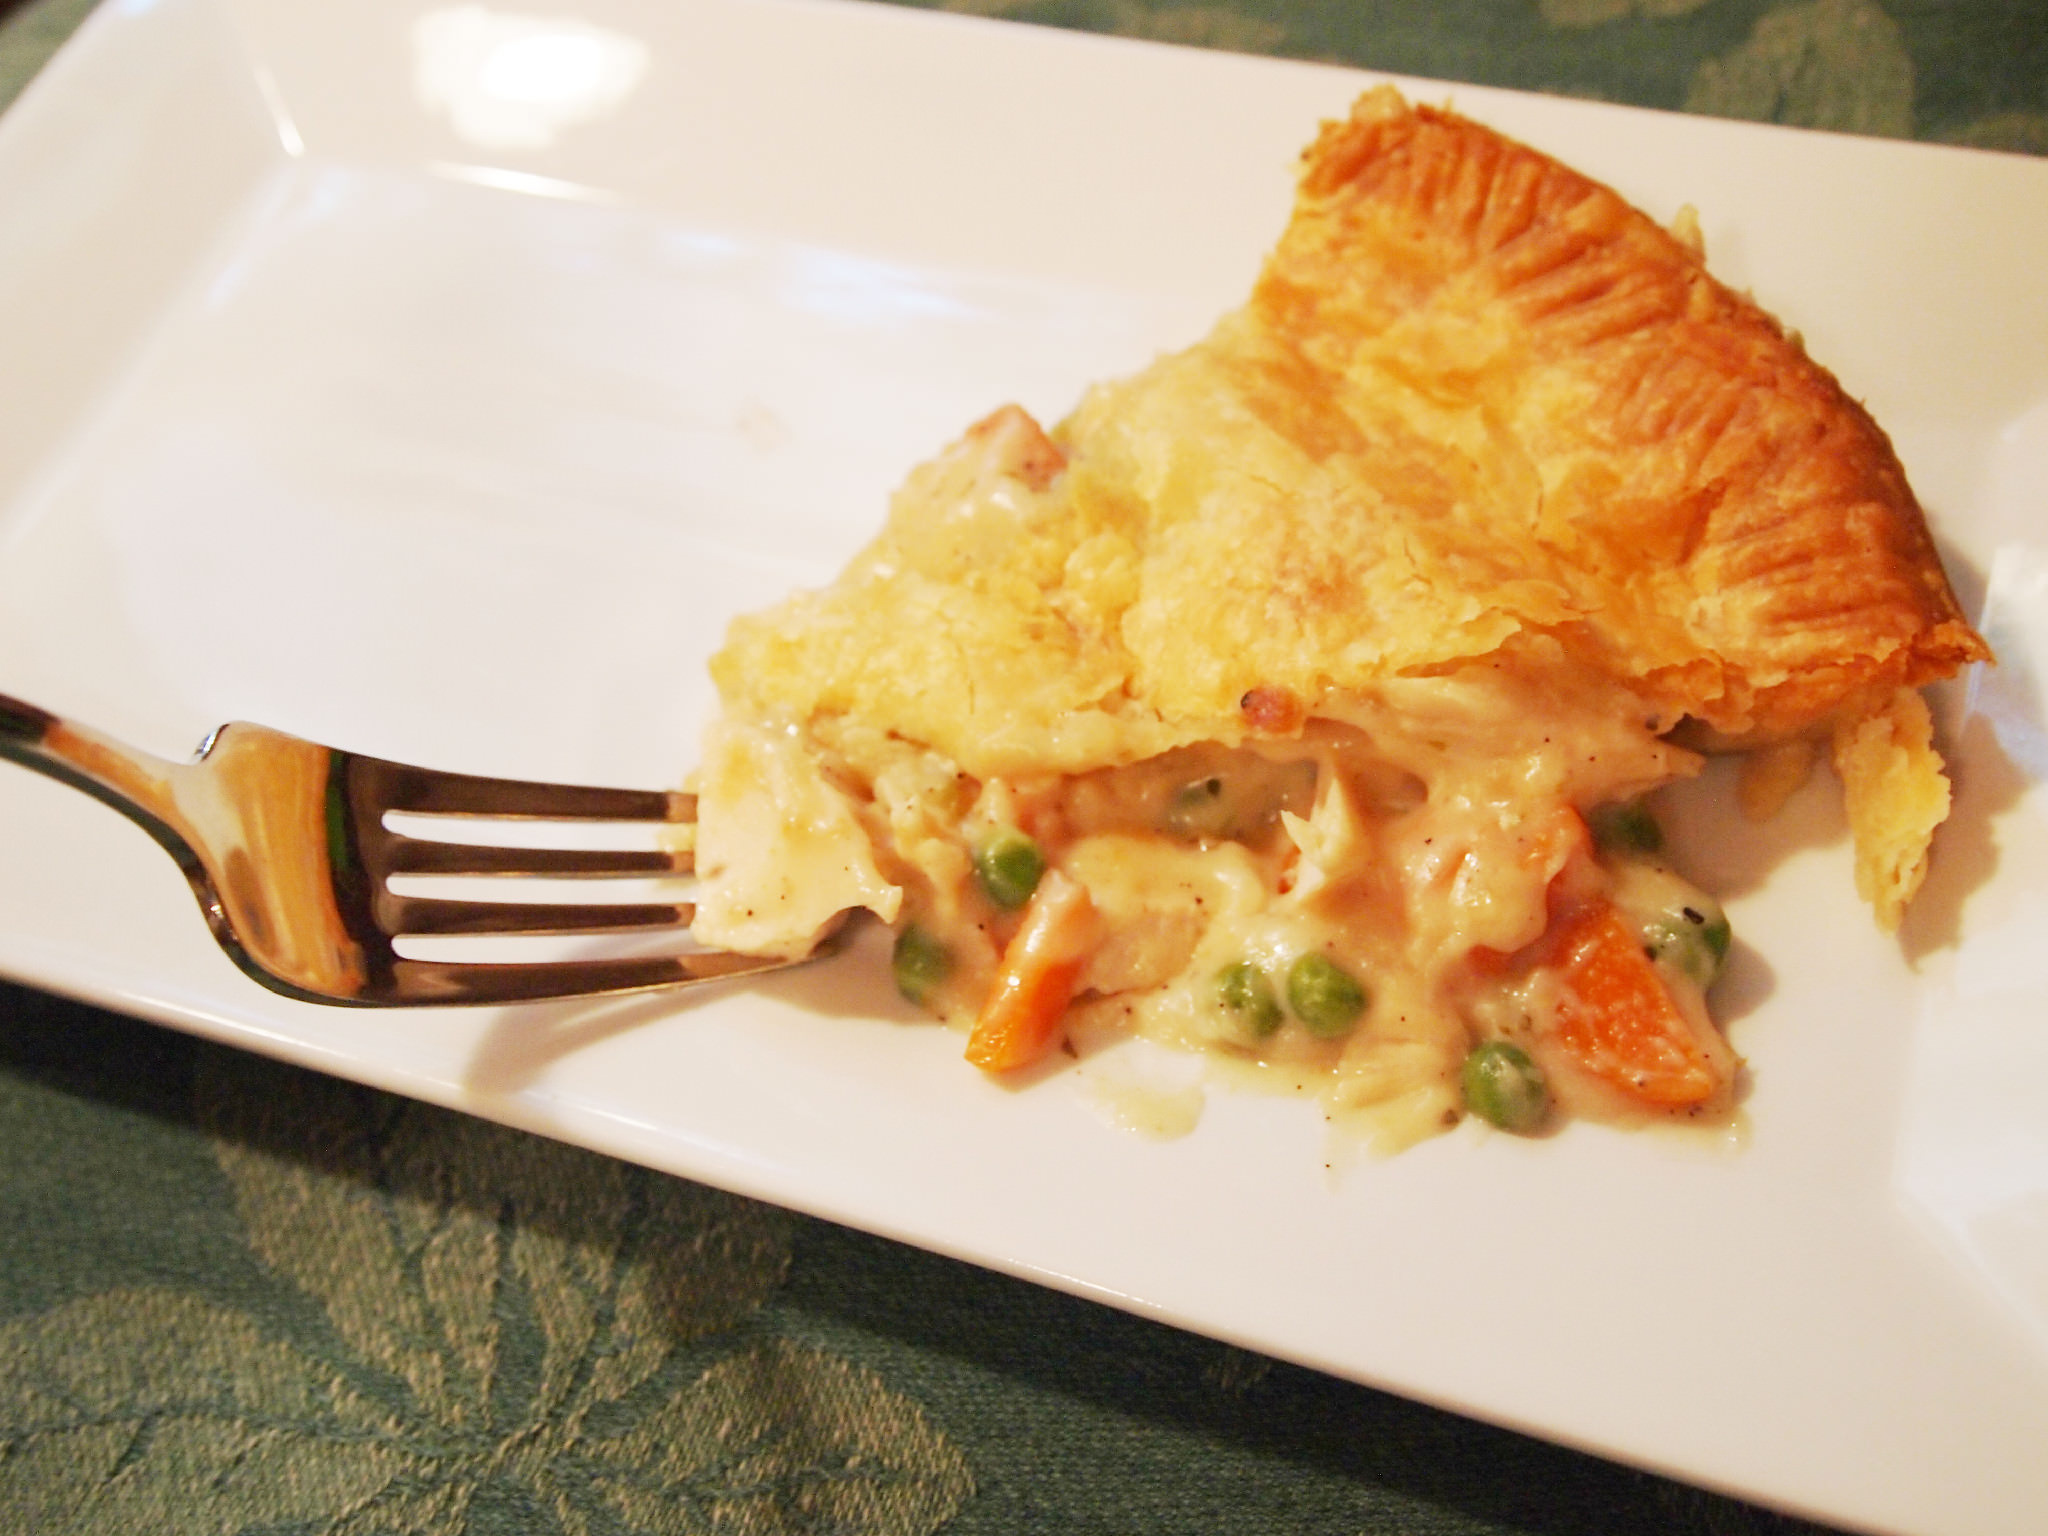 Chicken pot pie. Nothing says 'comfort food' better than tender chicken and vegetables in a rich gravy, covered with a flaky, buttery pastry crust. | Recipe on ComfortablyDomestic.com